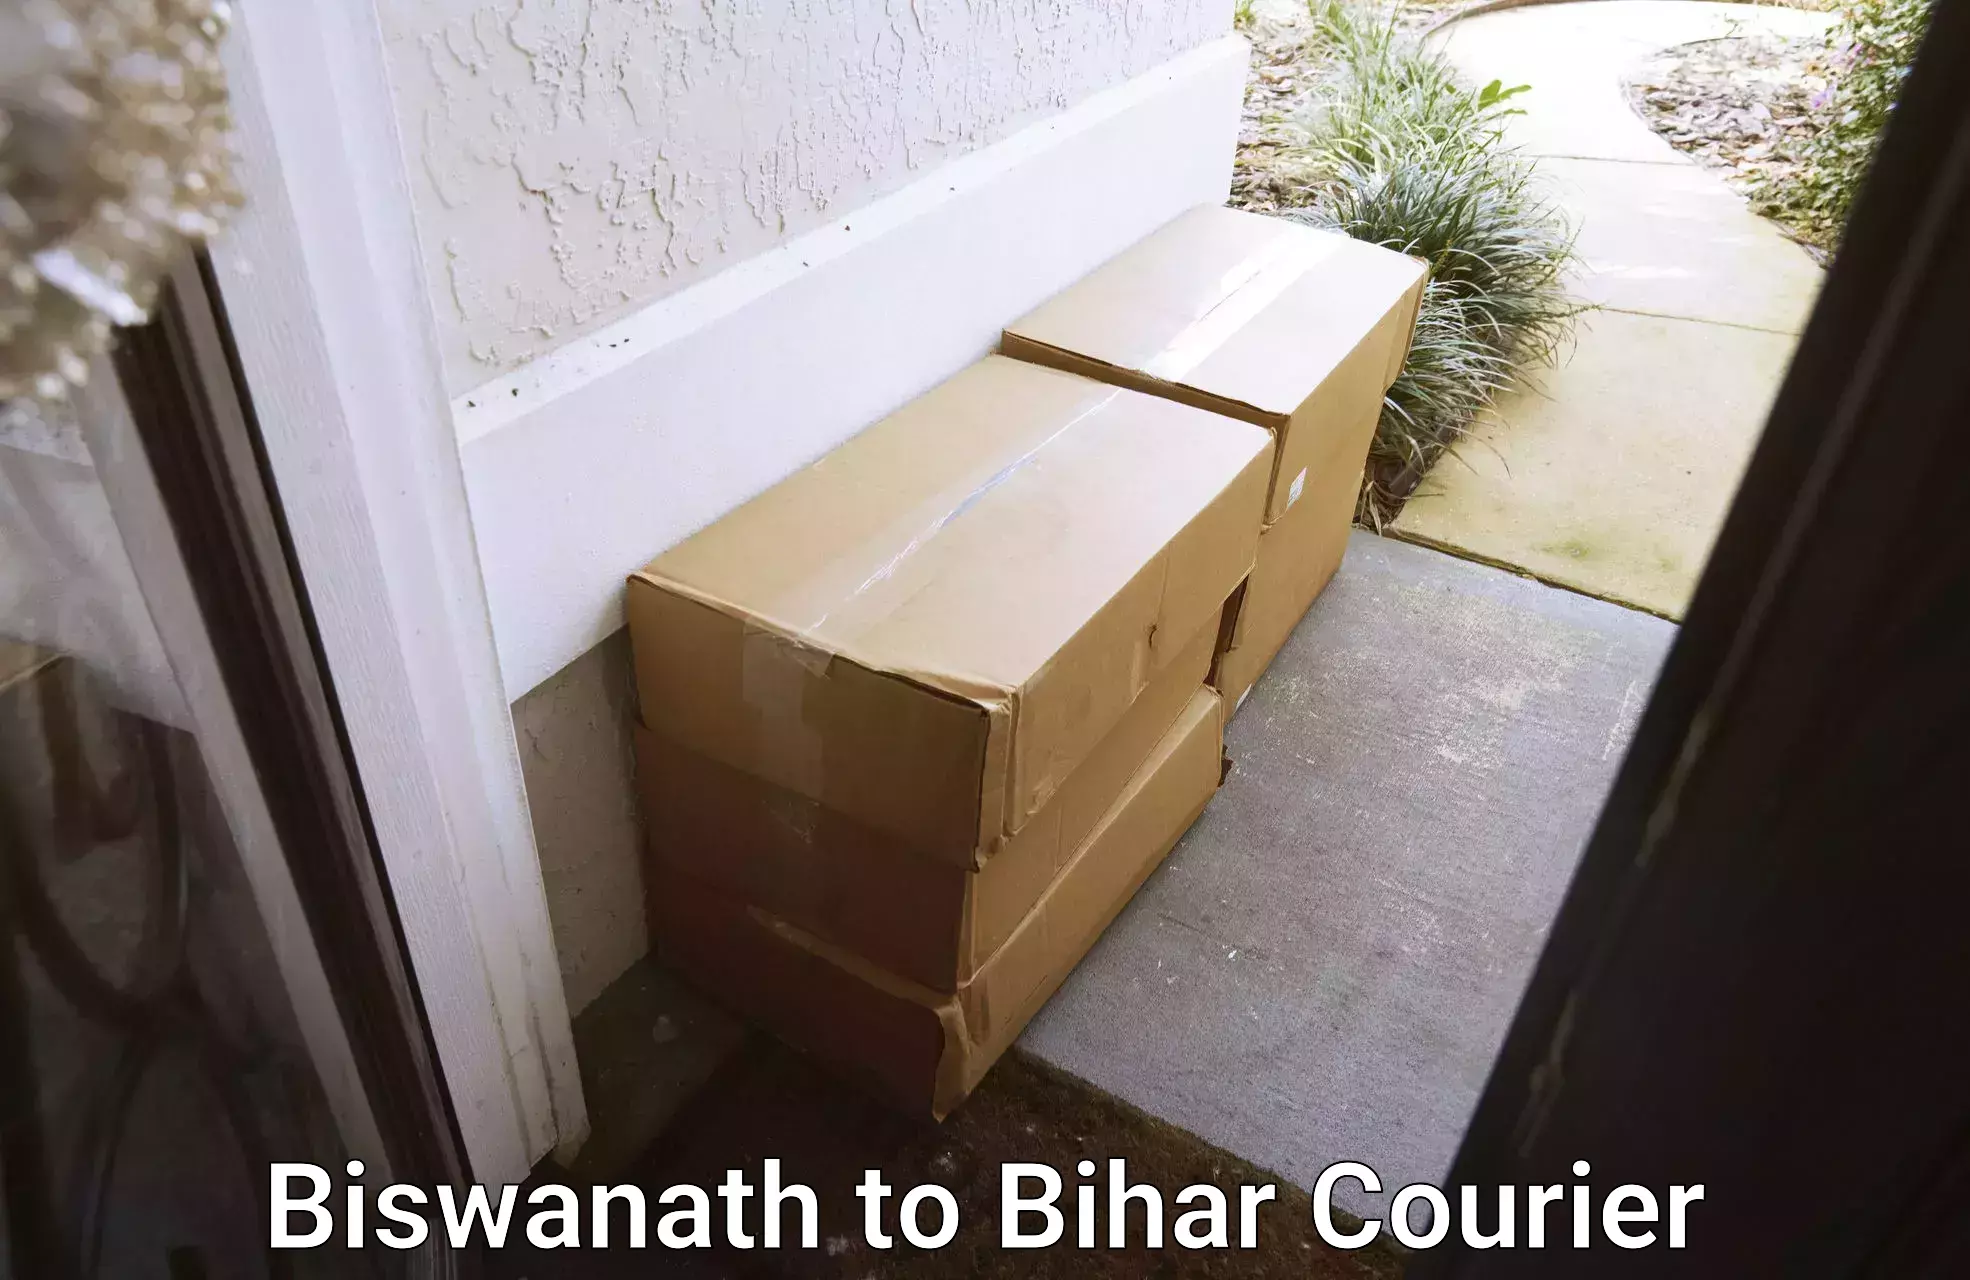 Domestic delivery options in Biswanath to Amarpur Banka